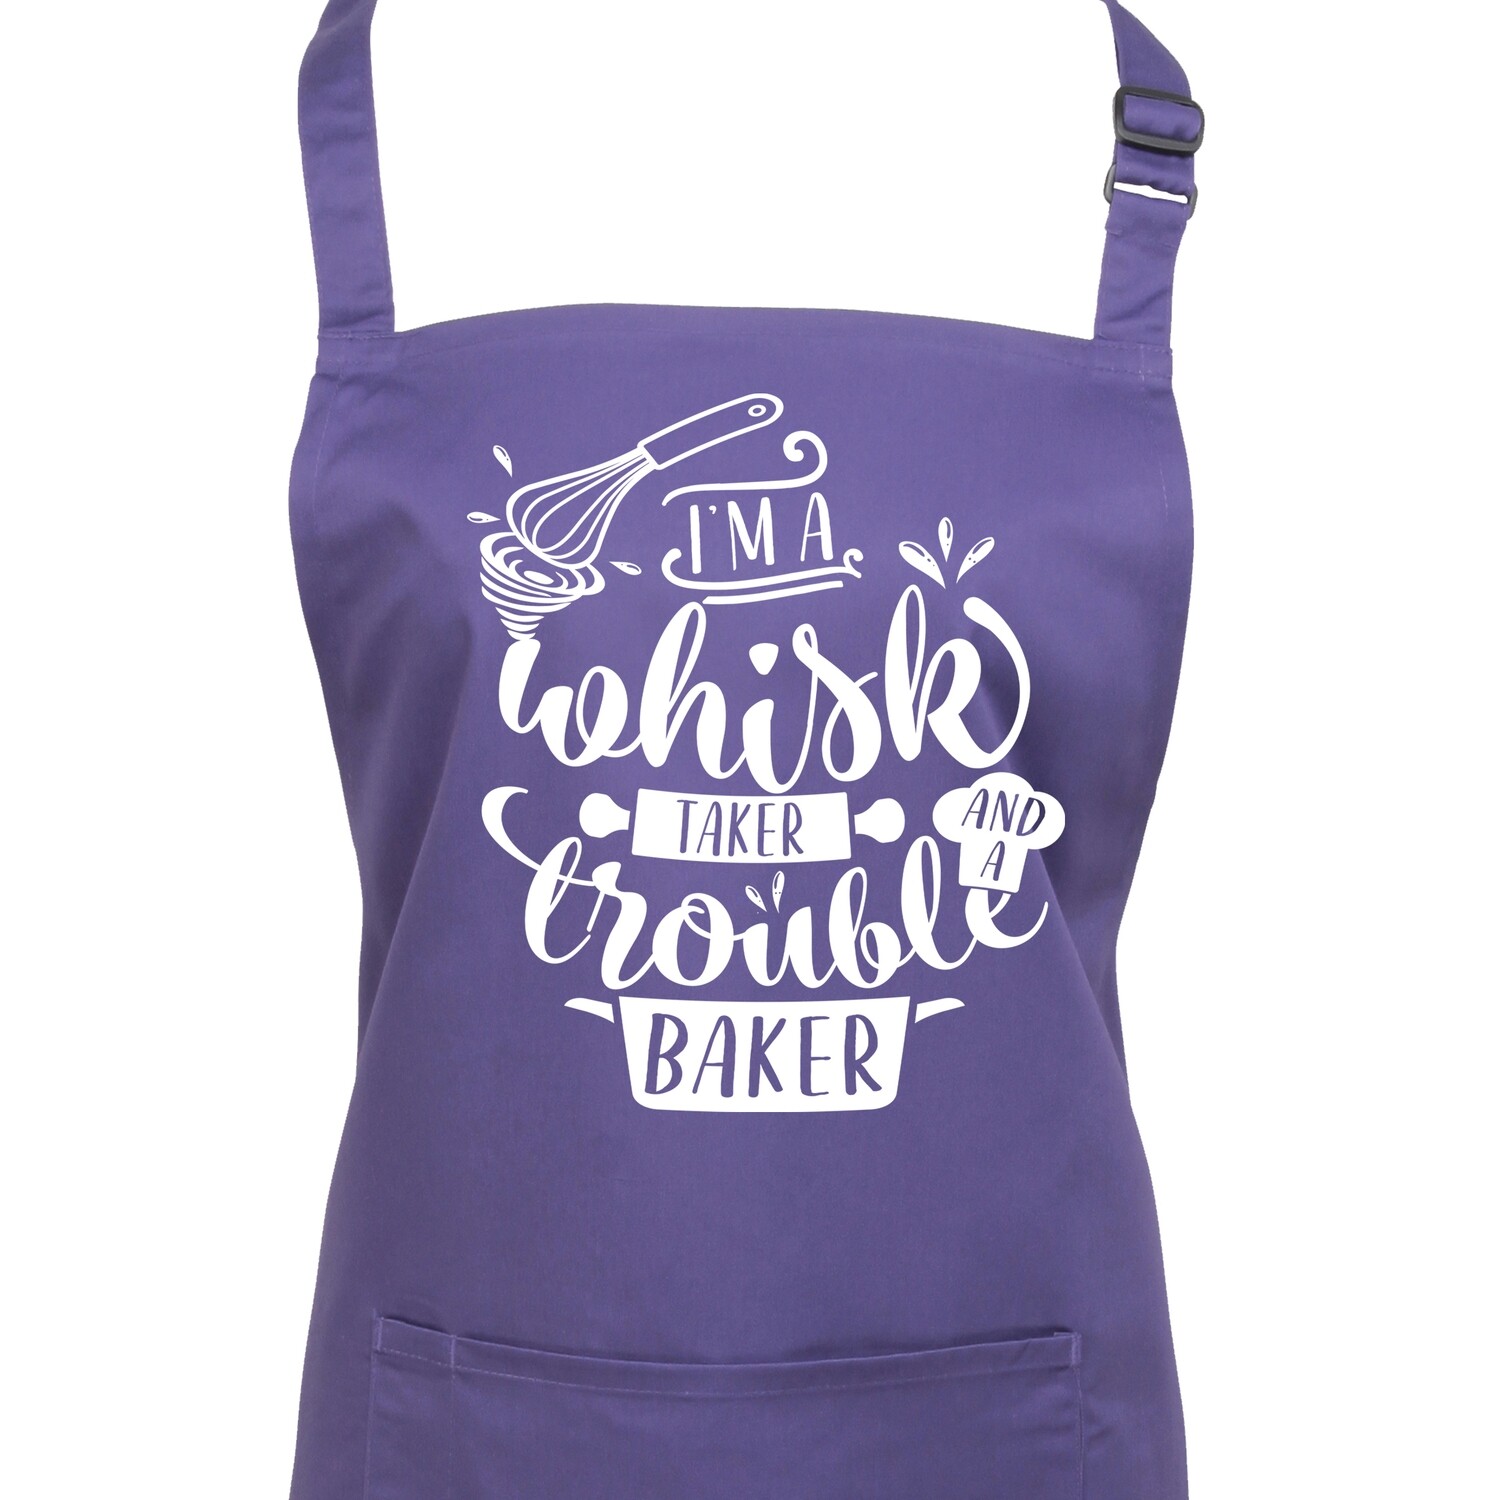 Funny Baking Apron. Whisk Taker Trouble Baker. Choice of Colours